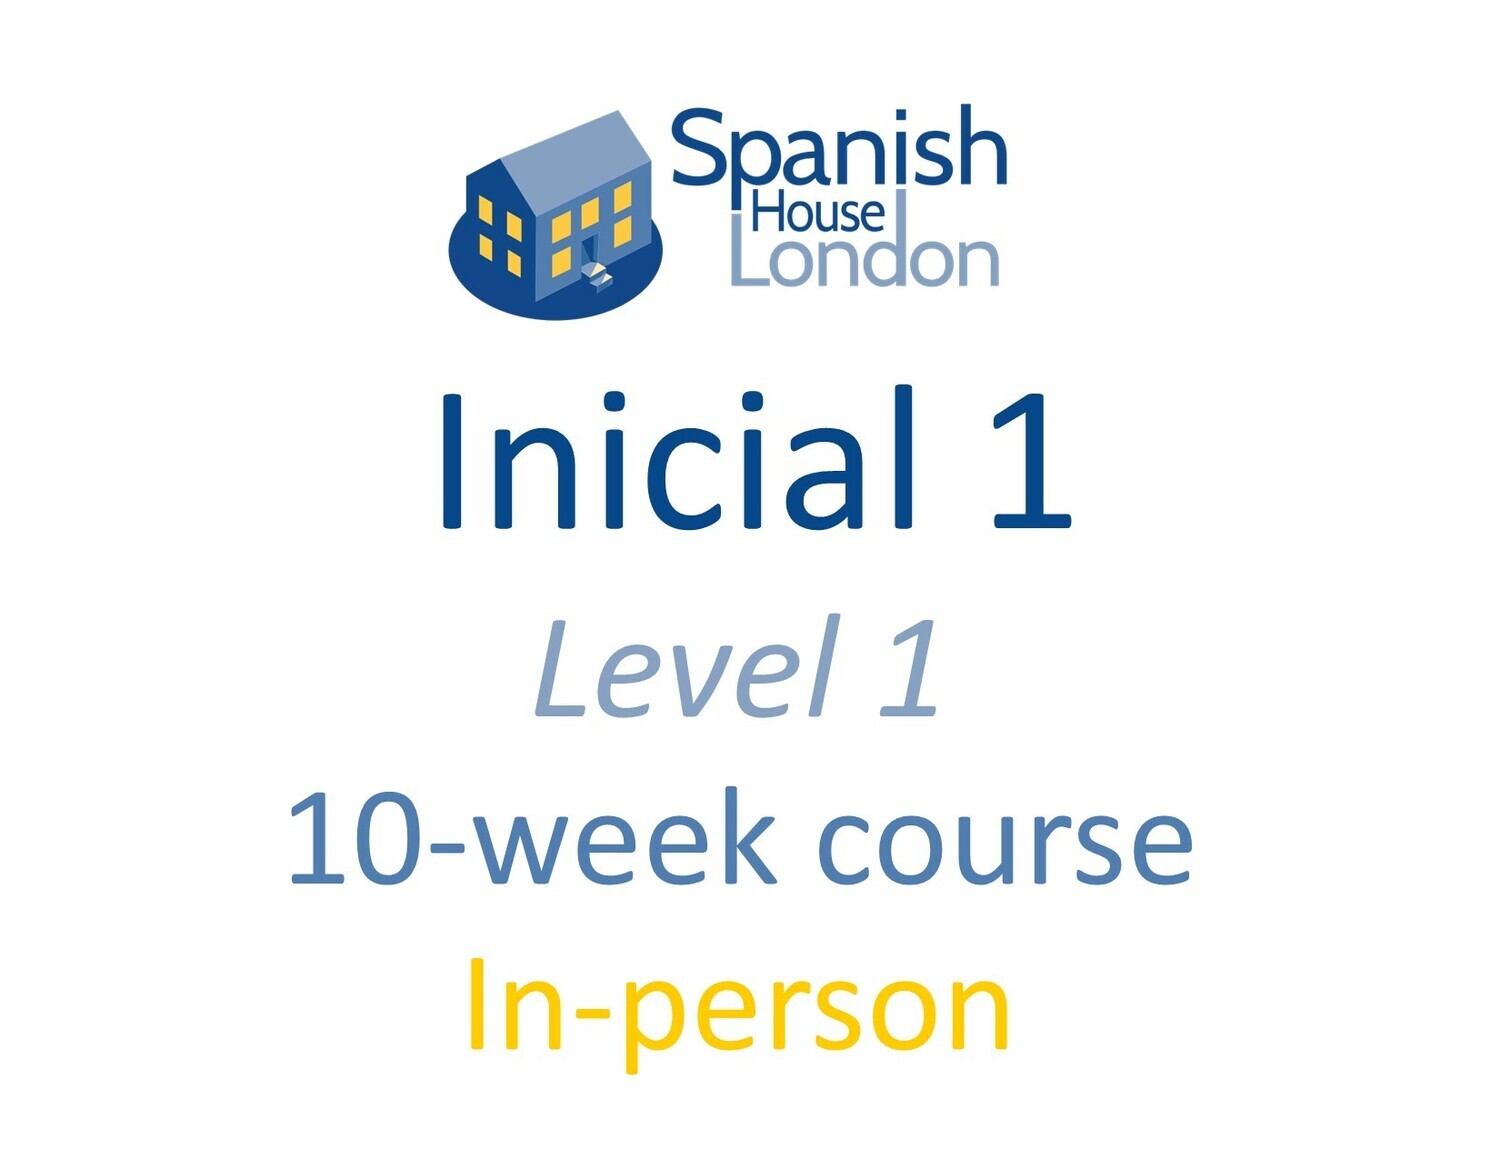 Inicial 1 Course starting on 5th June at 7.30pm in Euston / King's Cross